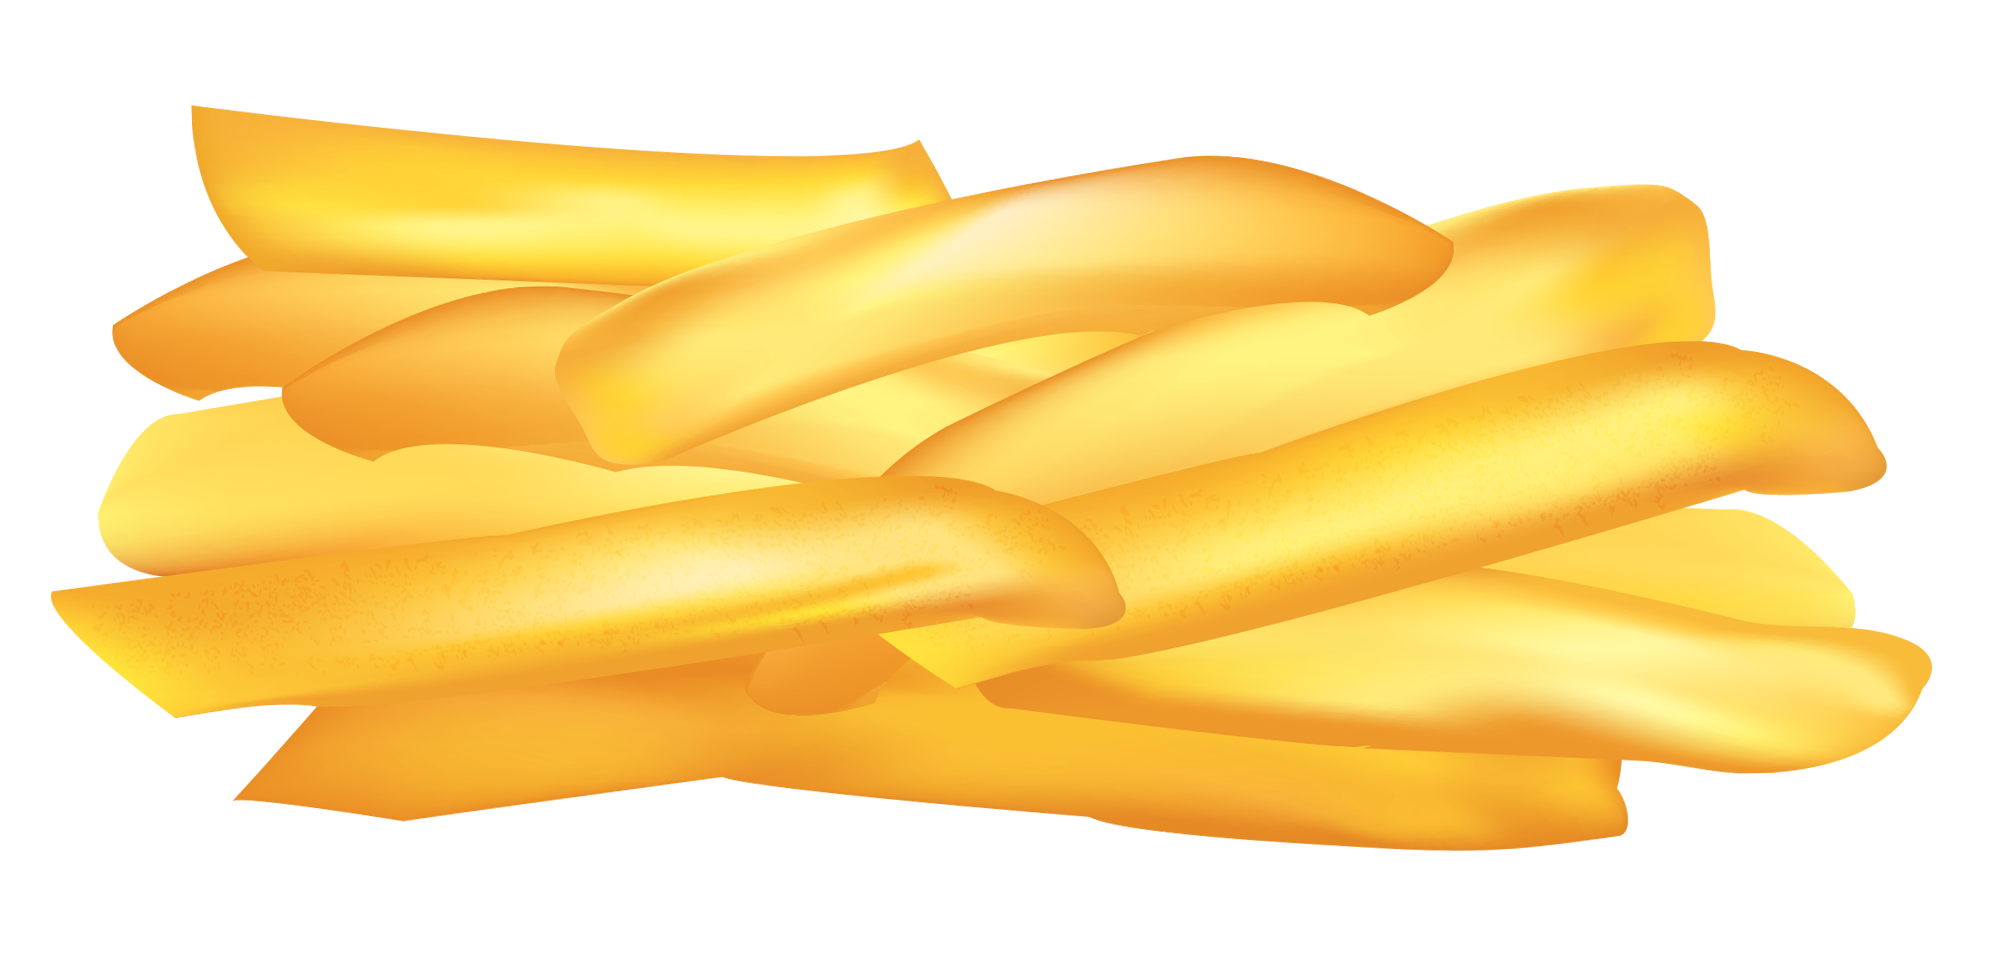 French fries png image. Food clipart fry